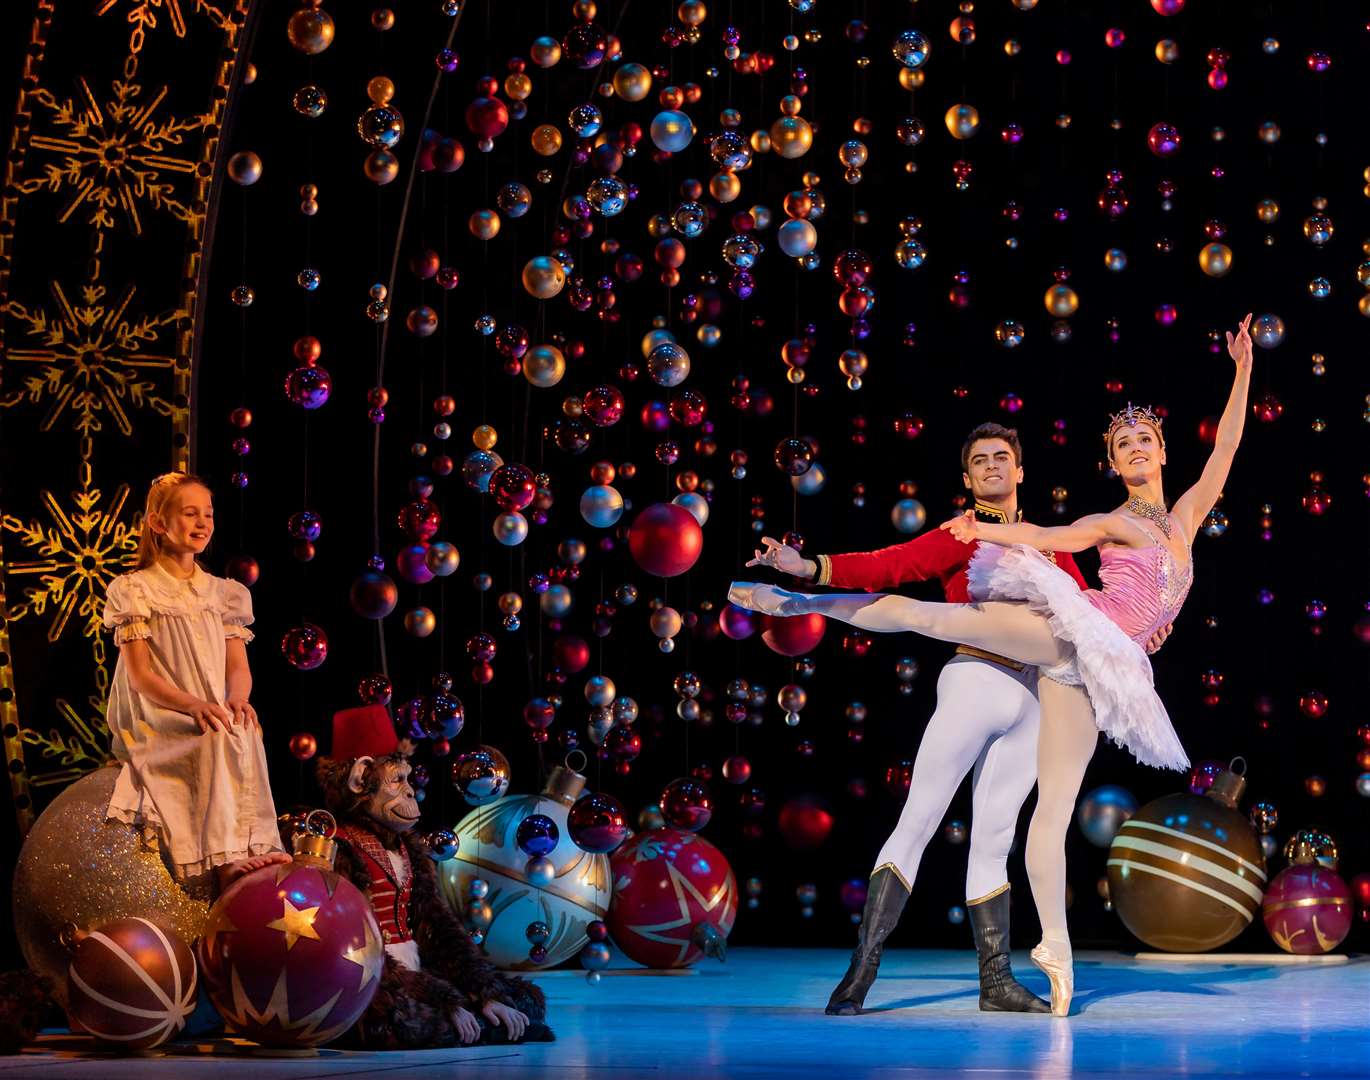 Evan as the Nutcracker Prince with Marge Hendrick as Sugar Plum Fairy in Peter Darrell's The Nutcracker. Picture: Andy Ross